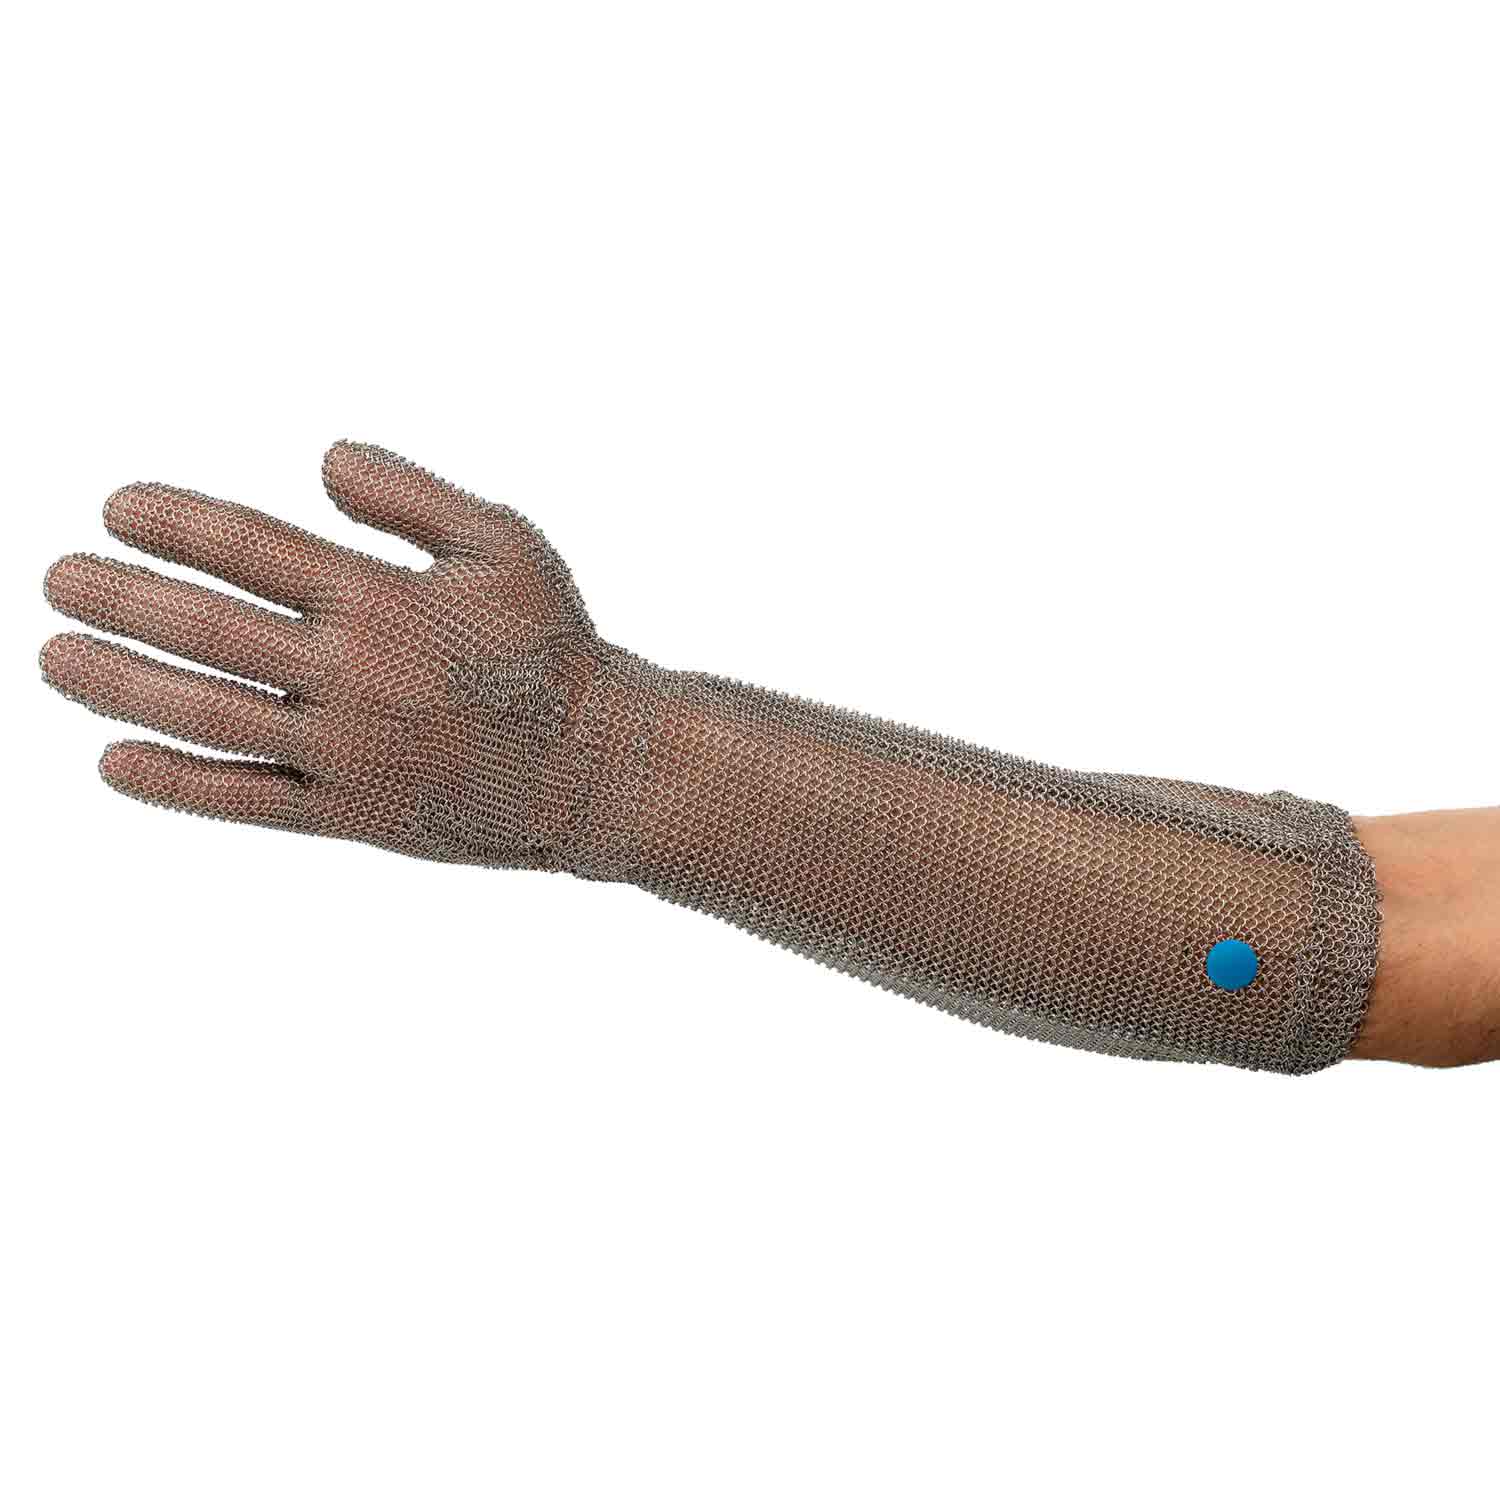 Manulatex Manulatex Glove Mesh Right Hand Long Cuff Blue Large - Each Safety & PPE  